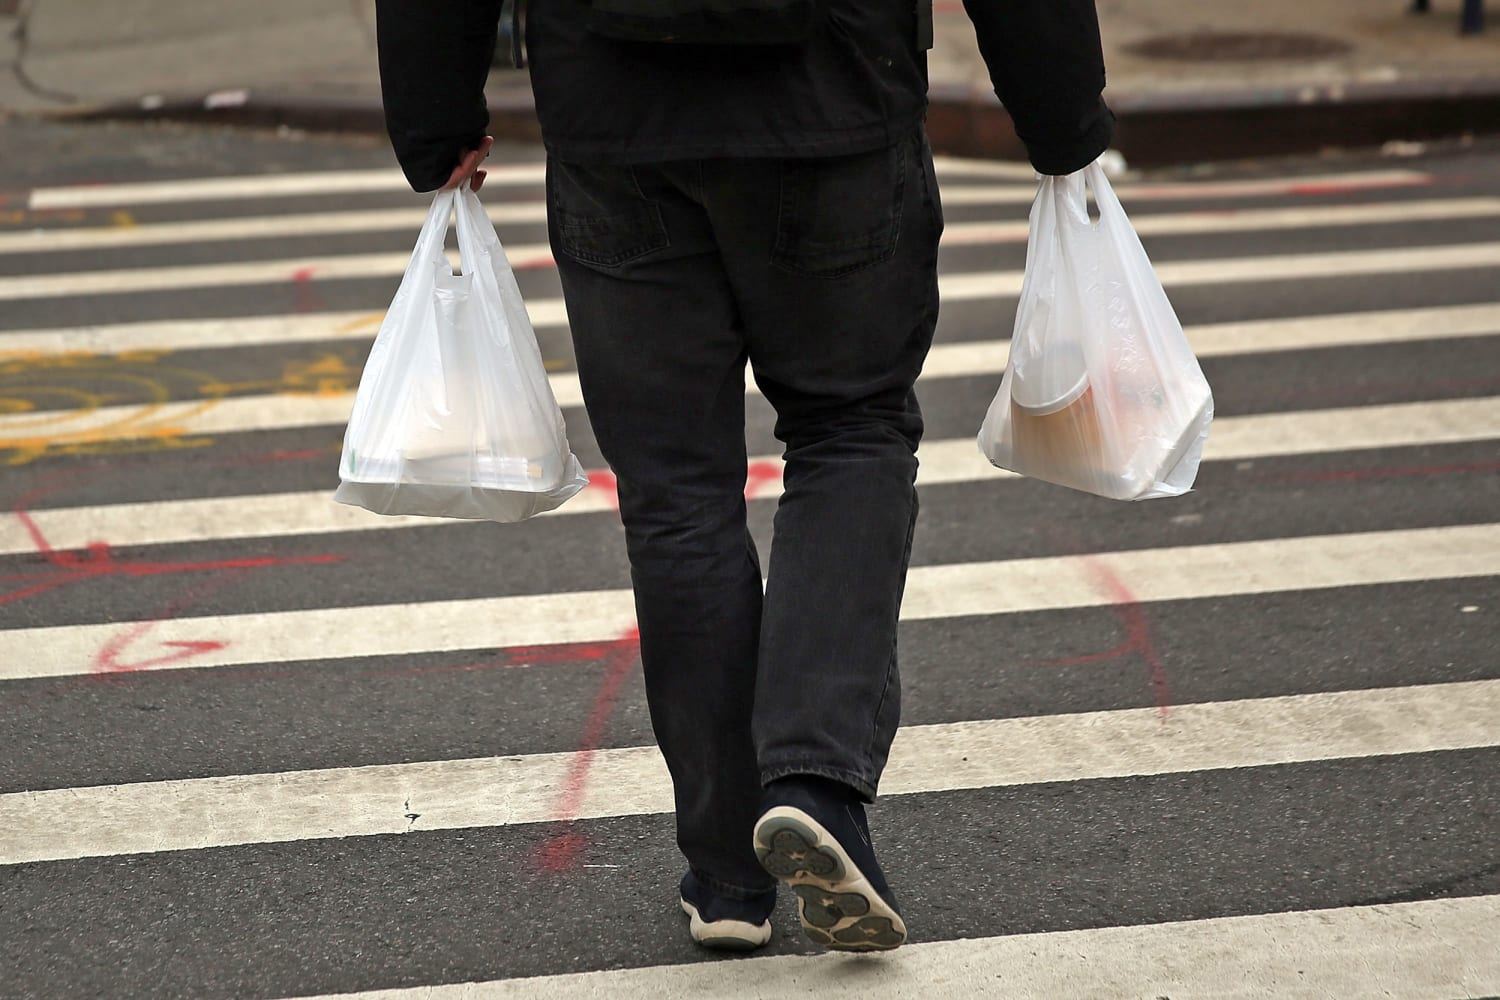 Three reasons why banning plastic bags is problematic